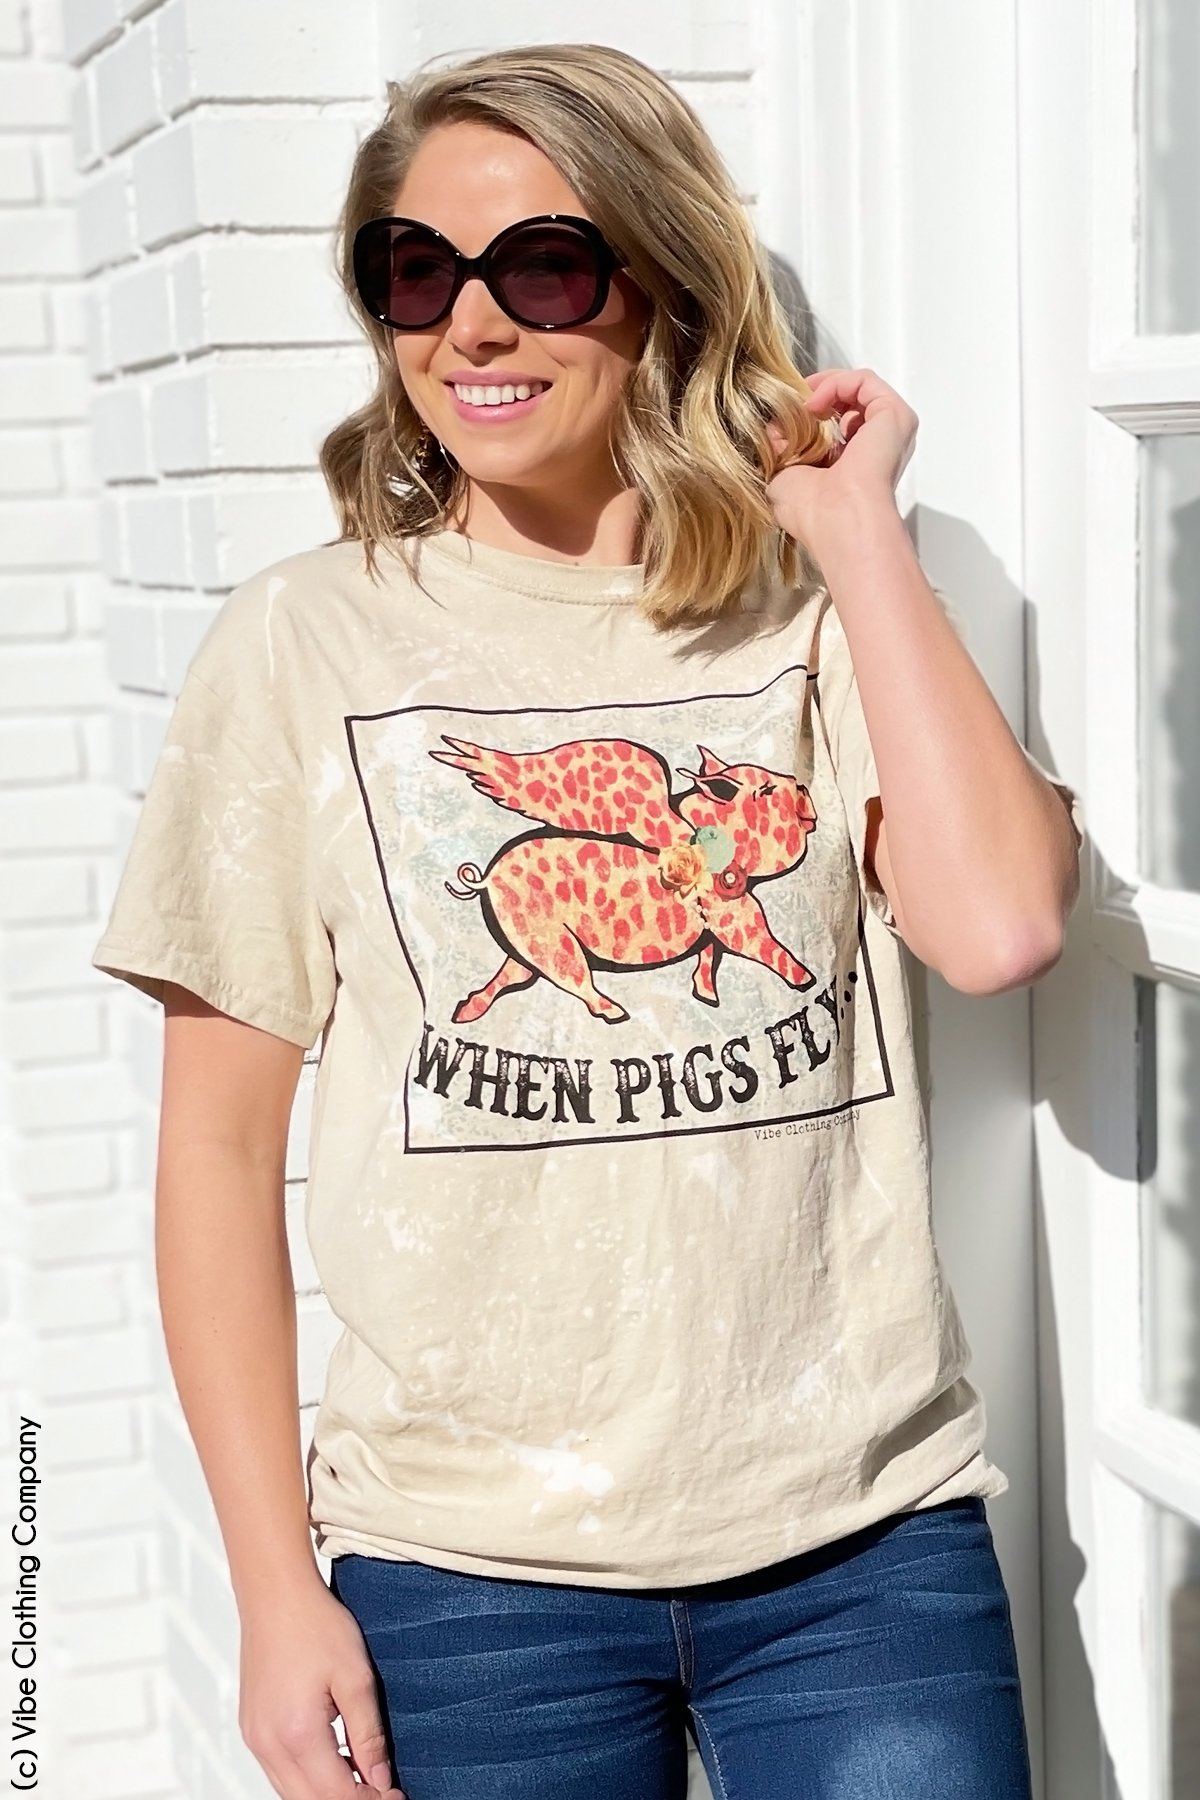 When Pigs Fly Graphic Tee graphic tees Mark tee 